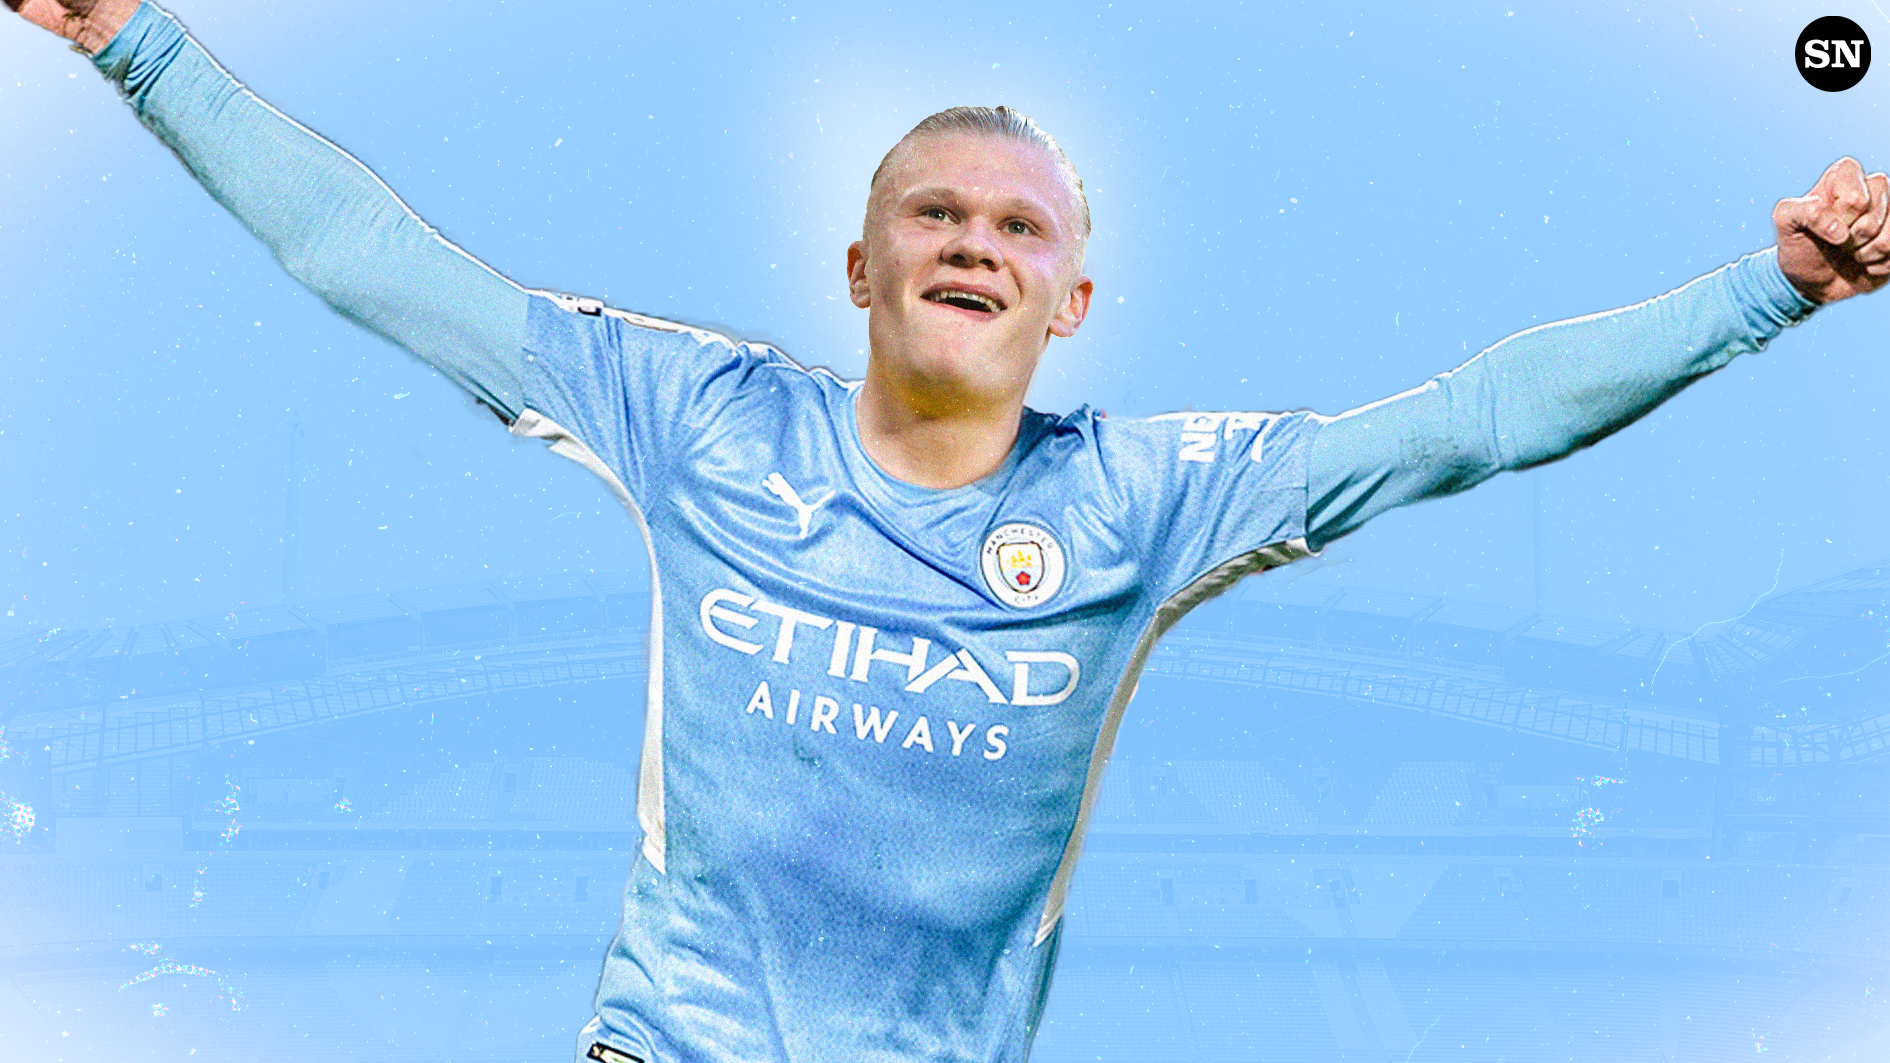 How will Erling Haaland fit in at Man City? Will he be Pep Guardiola's top earner?